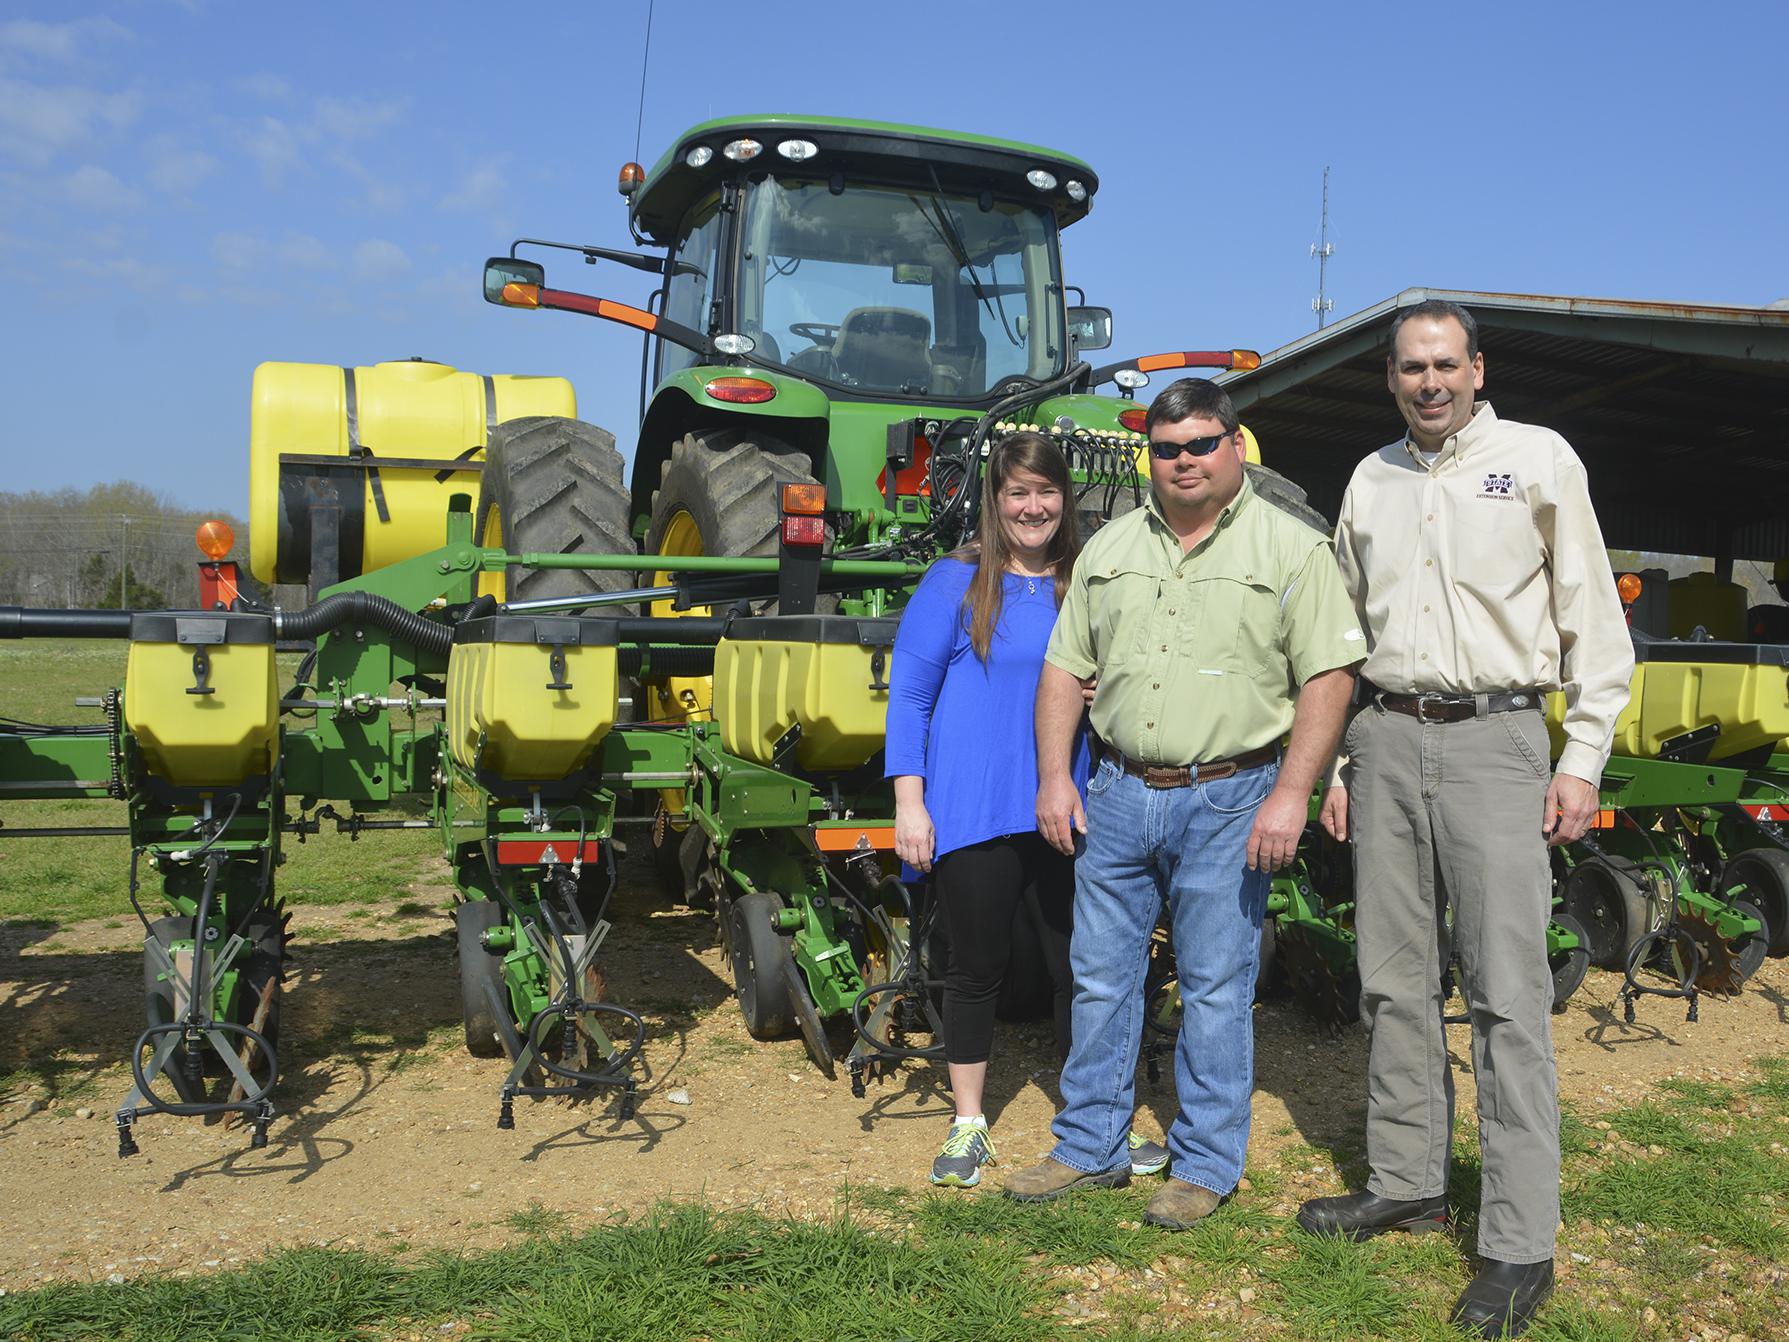 Molly and Brad Judson of Clay County are one of four couples who recently earned the National Outstanding Young Farmers award. They were nominated by Charlie Stokes, right, their Mississippi State University Extension Service agent, for the recognition from the National Association of County Agricultural Agents. (Photo by MSU Extension Service/Linda Breazeale)